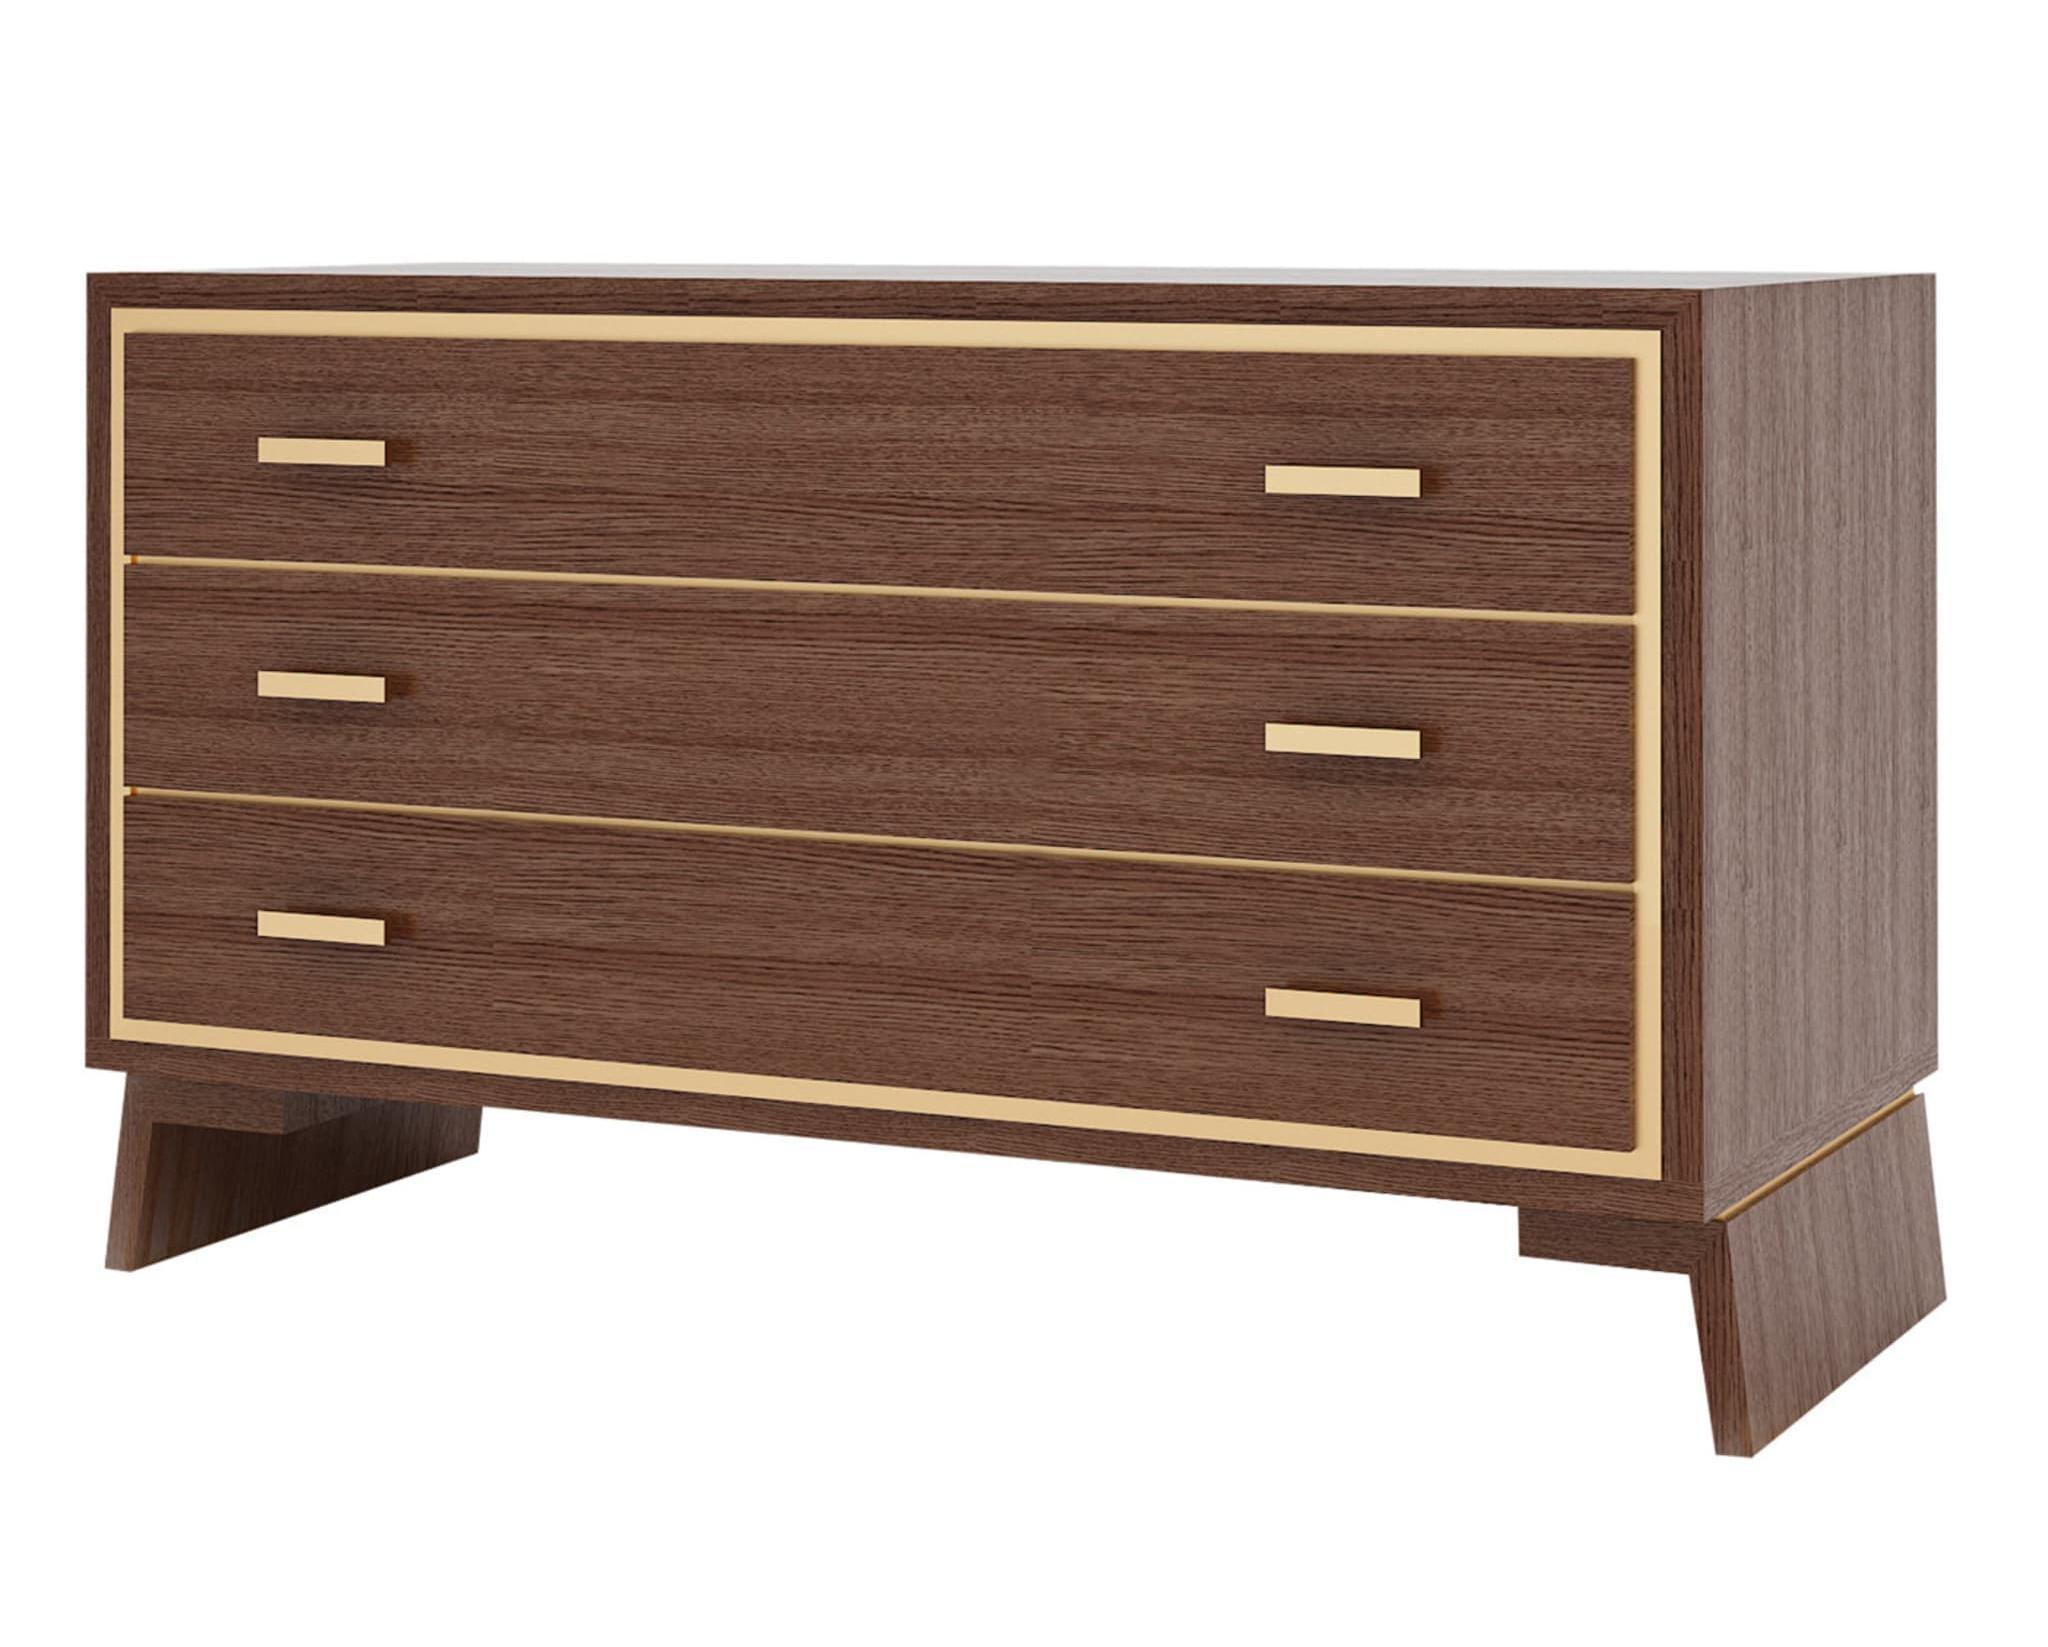 Wood Handcrafted Chest Of Drawers